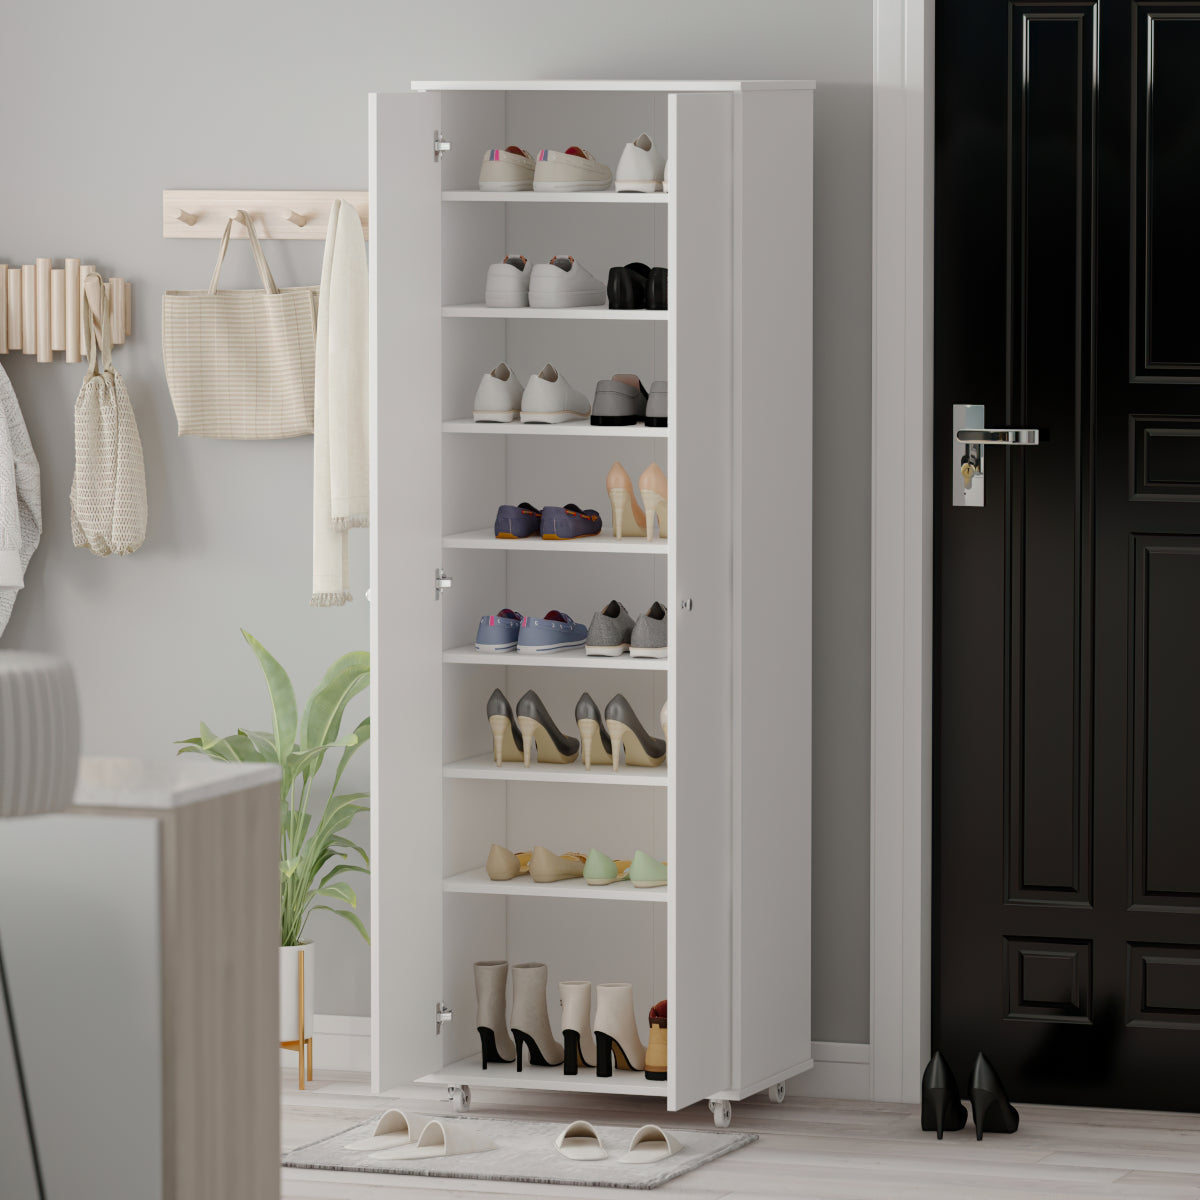  Hitow Large Shoe Cabinet with Wheels Wooden 2 Door Tall Shoe  Storage Rack 7 Adjustable Shelves Cabinet for Office,Home,Garage White :  Home & Kitchen